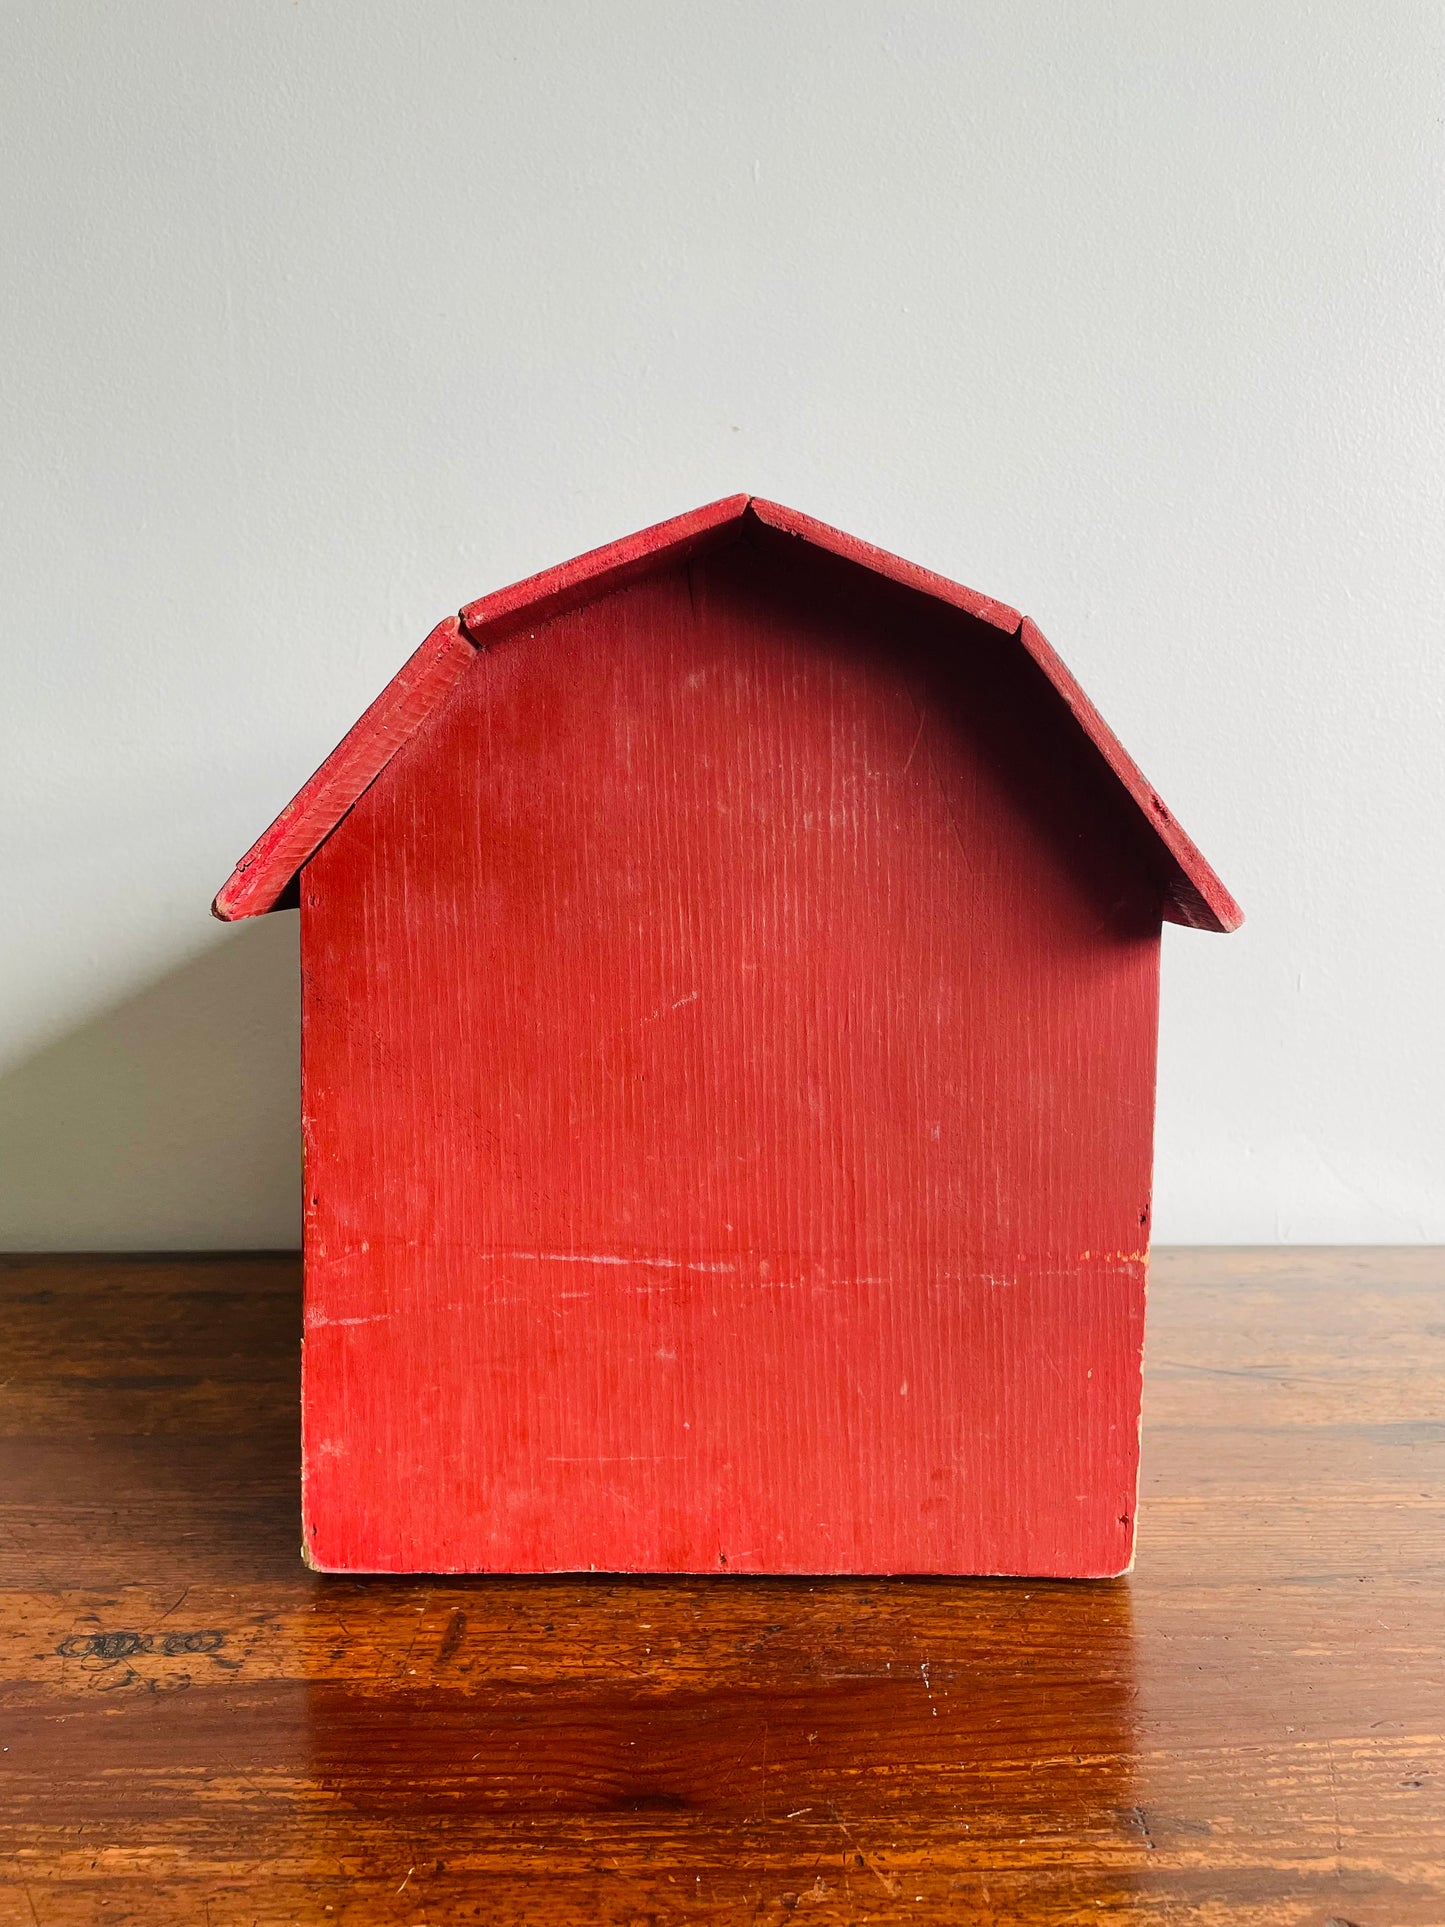 Handmade Red Wooden Barn - Child's Toy or Decor